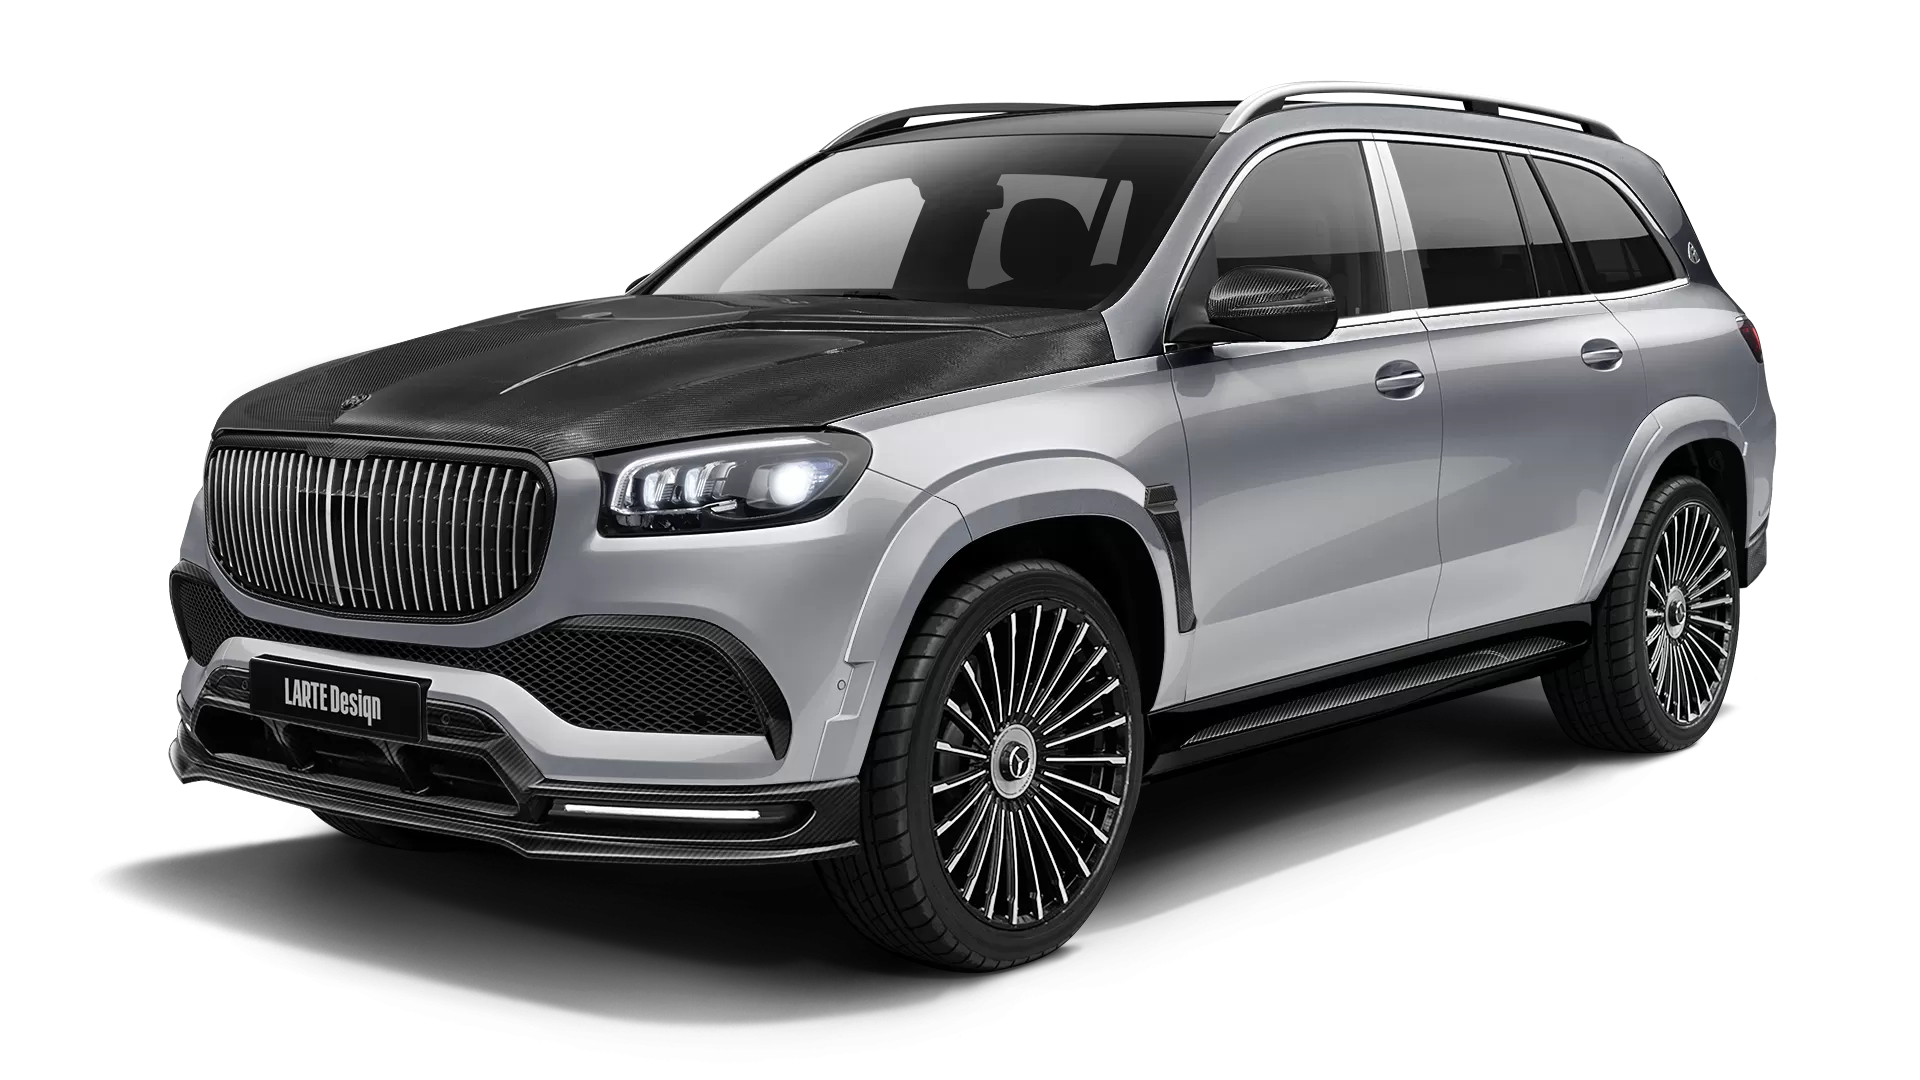 Mercedes Maybach GLS 600 with carbon body kit: front view shown in High Tech Silver & Selenite Grey